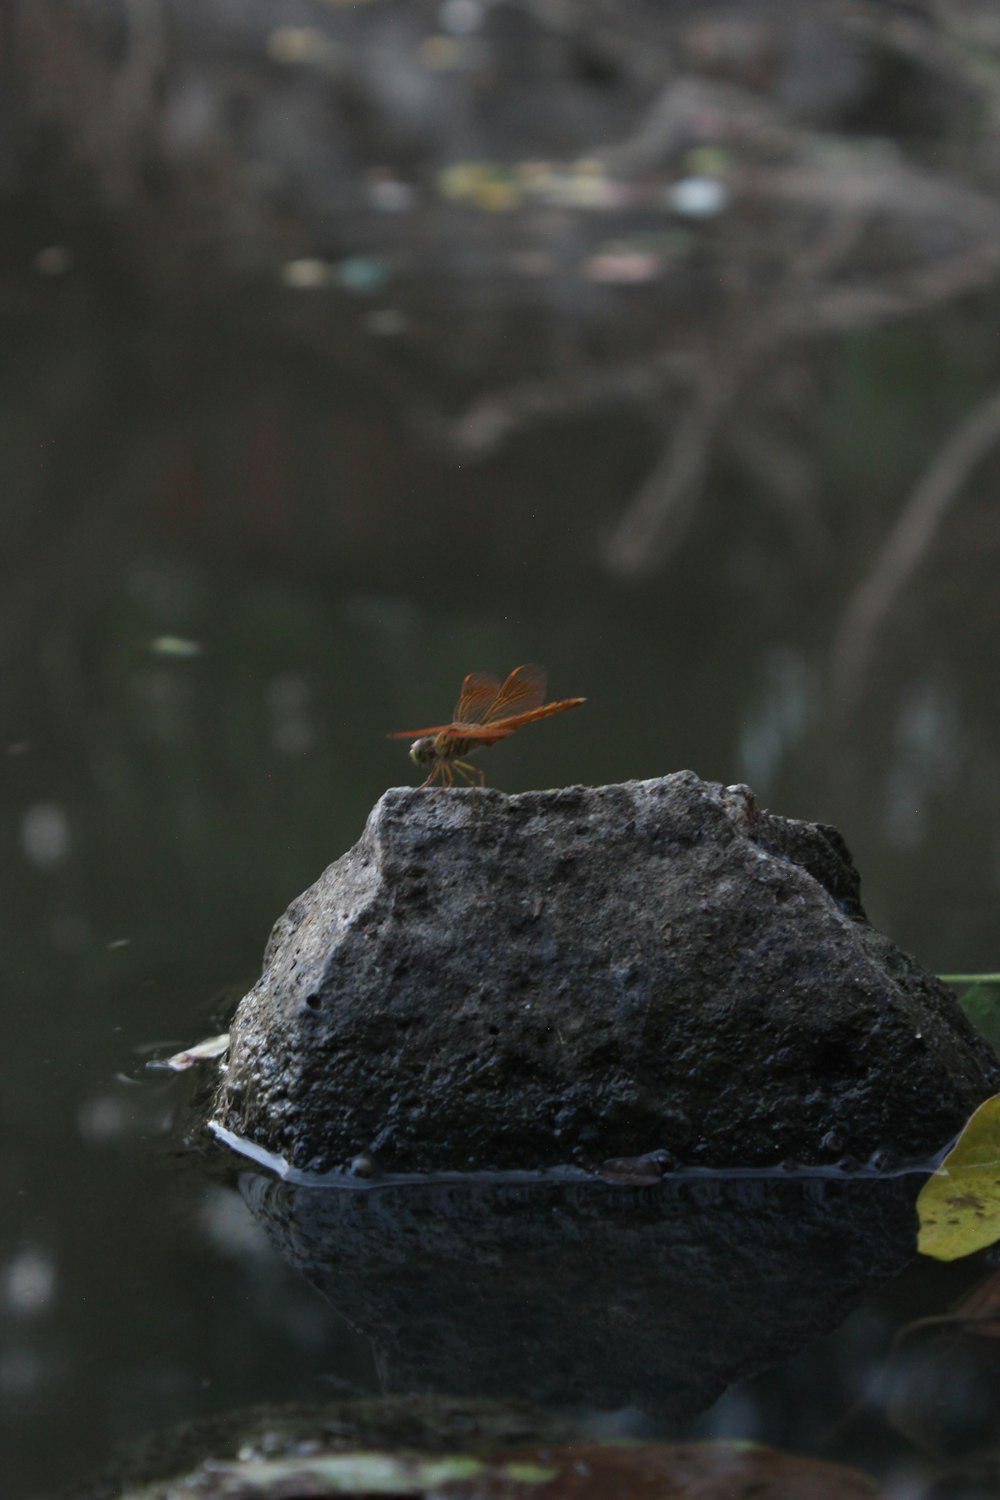 a dragonfly sitting on a rock in a pond